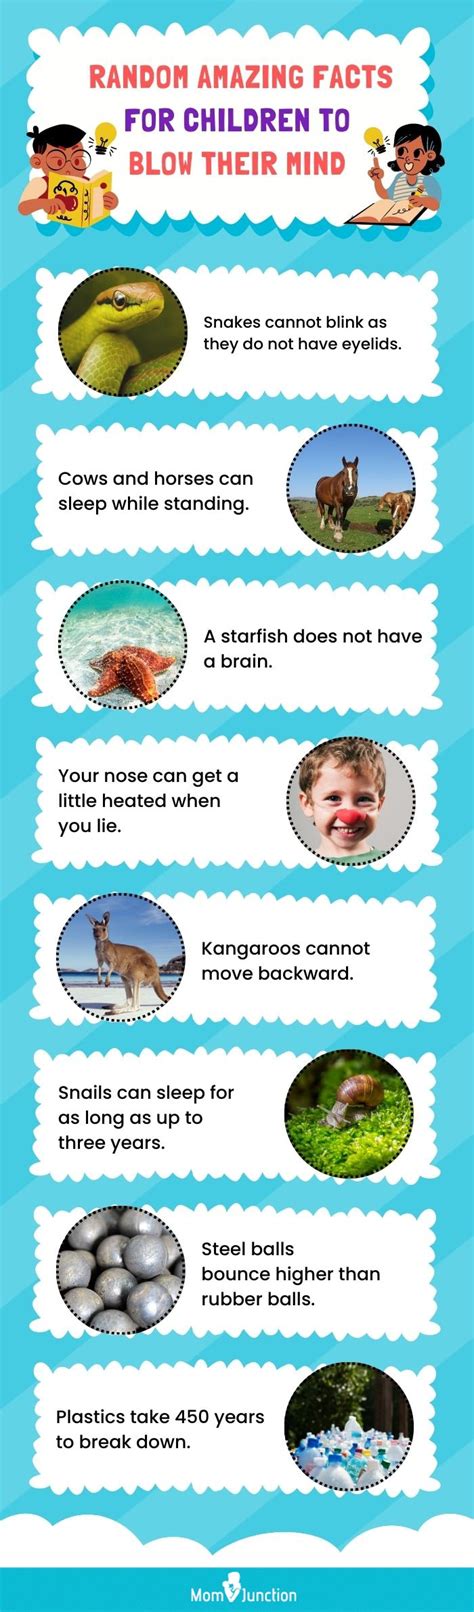 75 Amazing And Funny Facts For Kids To Know